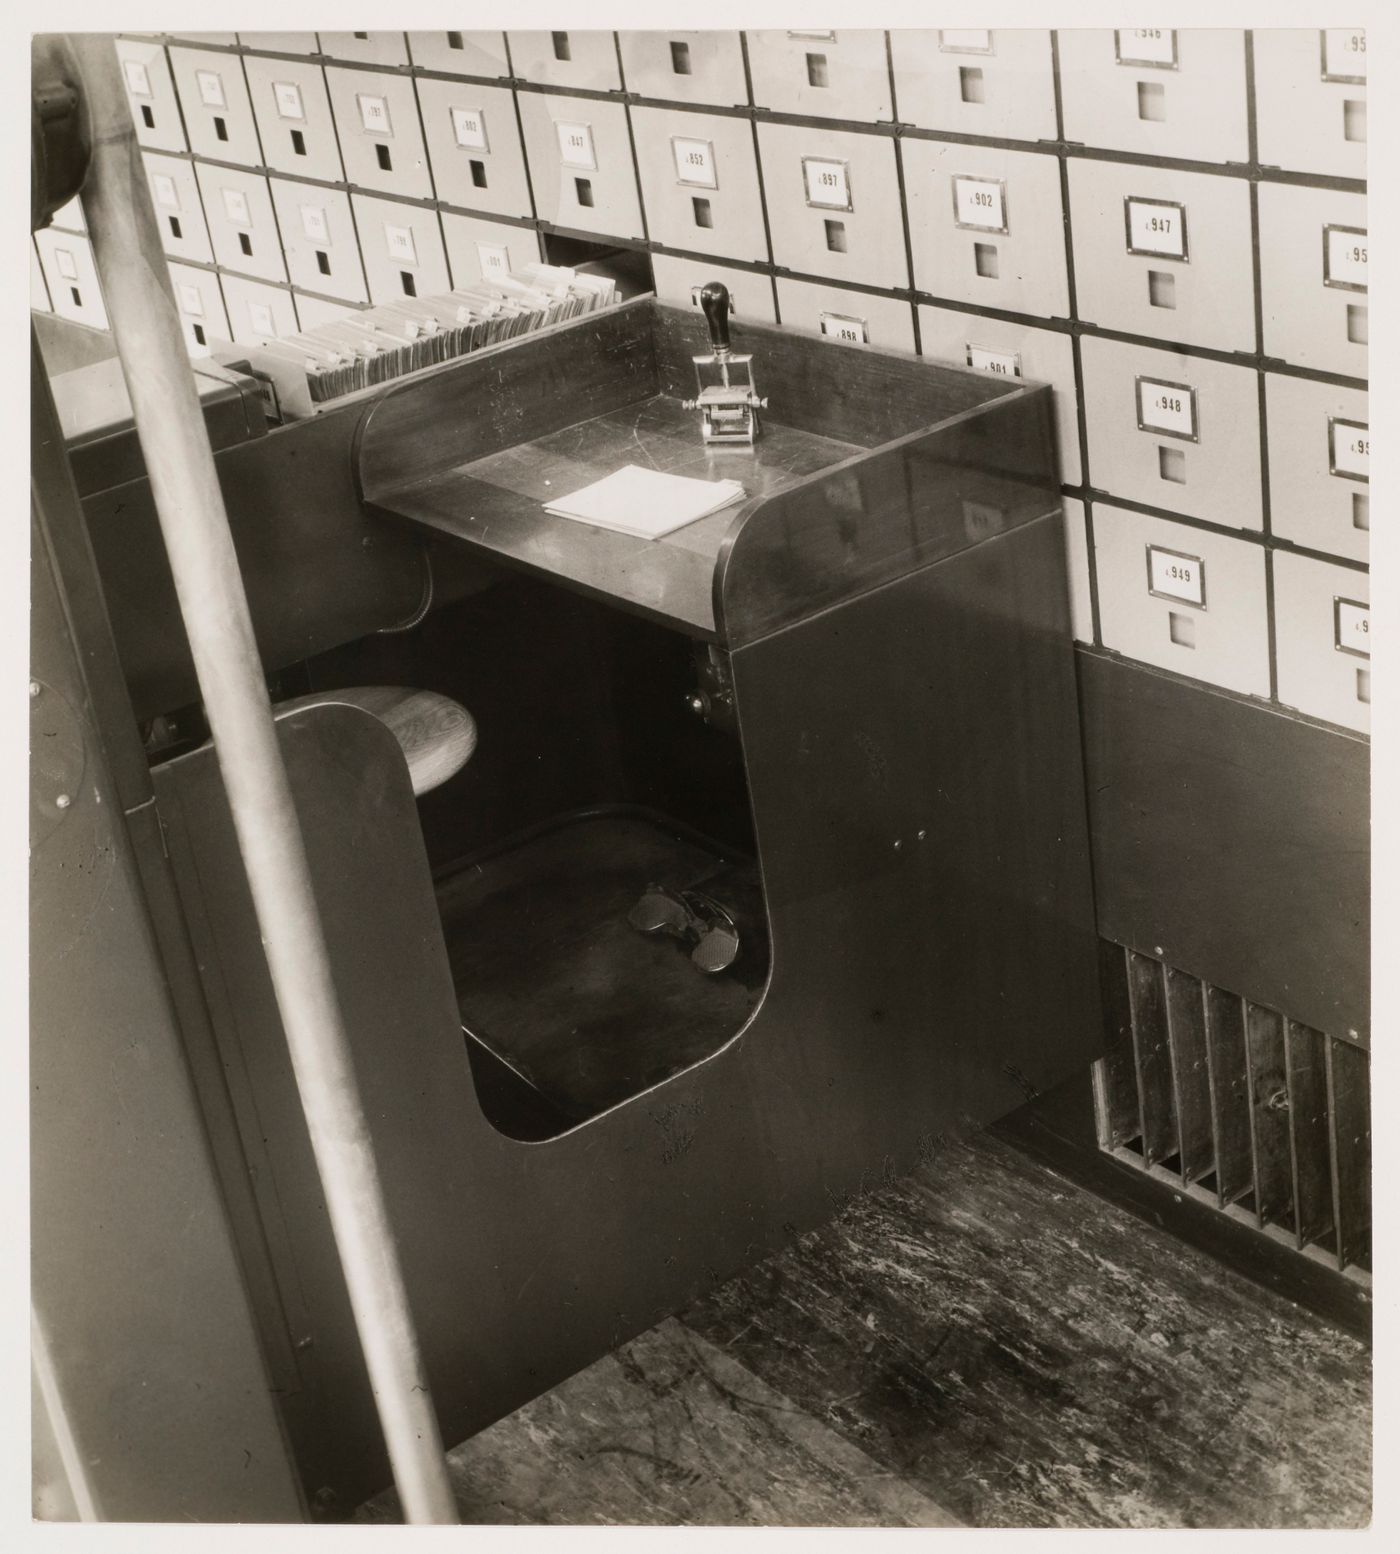 Interior view of the Central Social Insurance Institution showing a close-up view of a mobile work station used to access the card catalog drawers, Prague, Czechoslovakia (now Czech Republic)